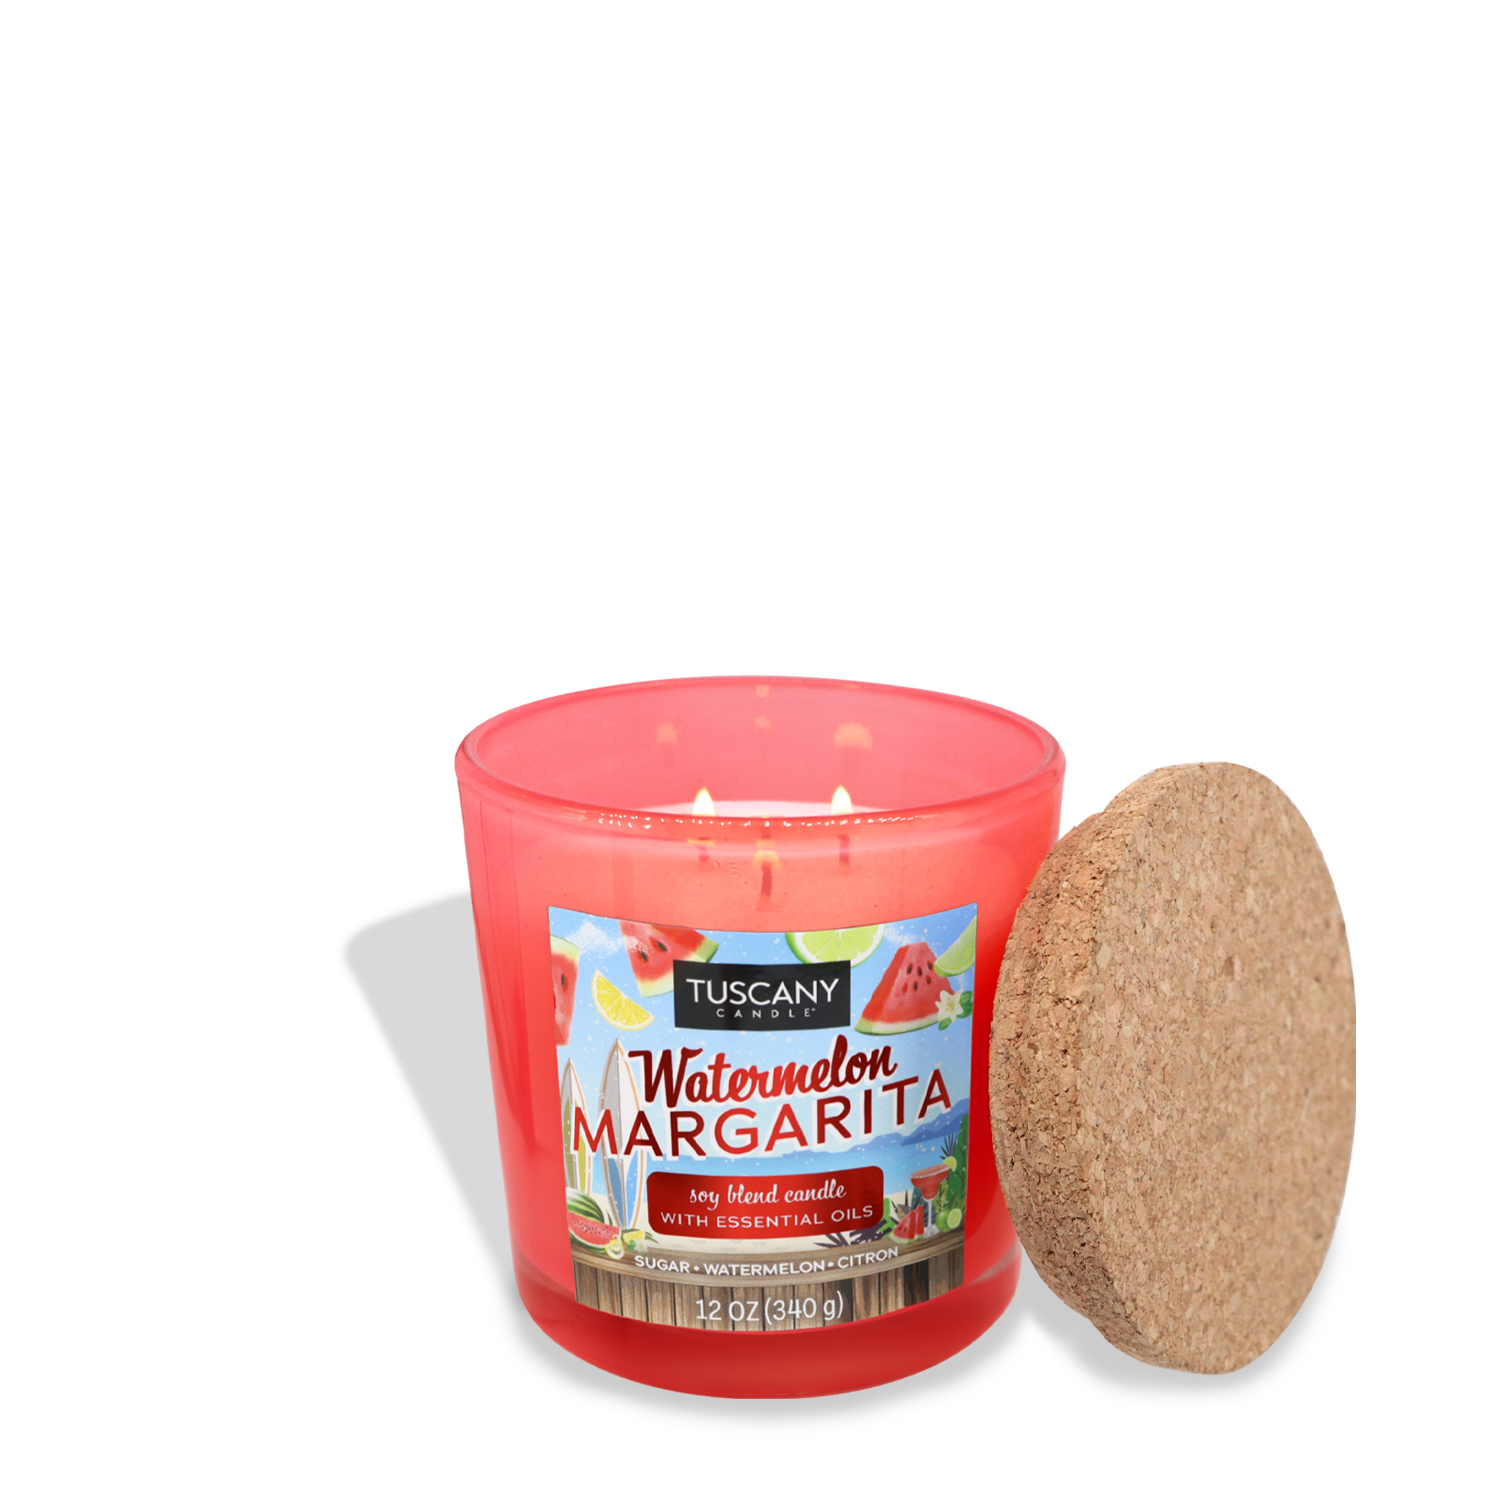 Red candle labeled "Watermelon Margarita (12 oz) – Sunset Beach Bar Collection" by Tuscany Candle® SEASONAL, positioned next to its cork lid on a white background. This summer candle promises a refreshing, fruity scent perfect for warm days.